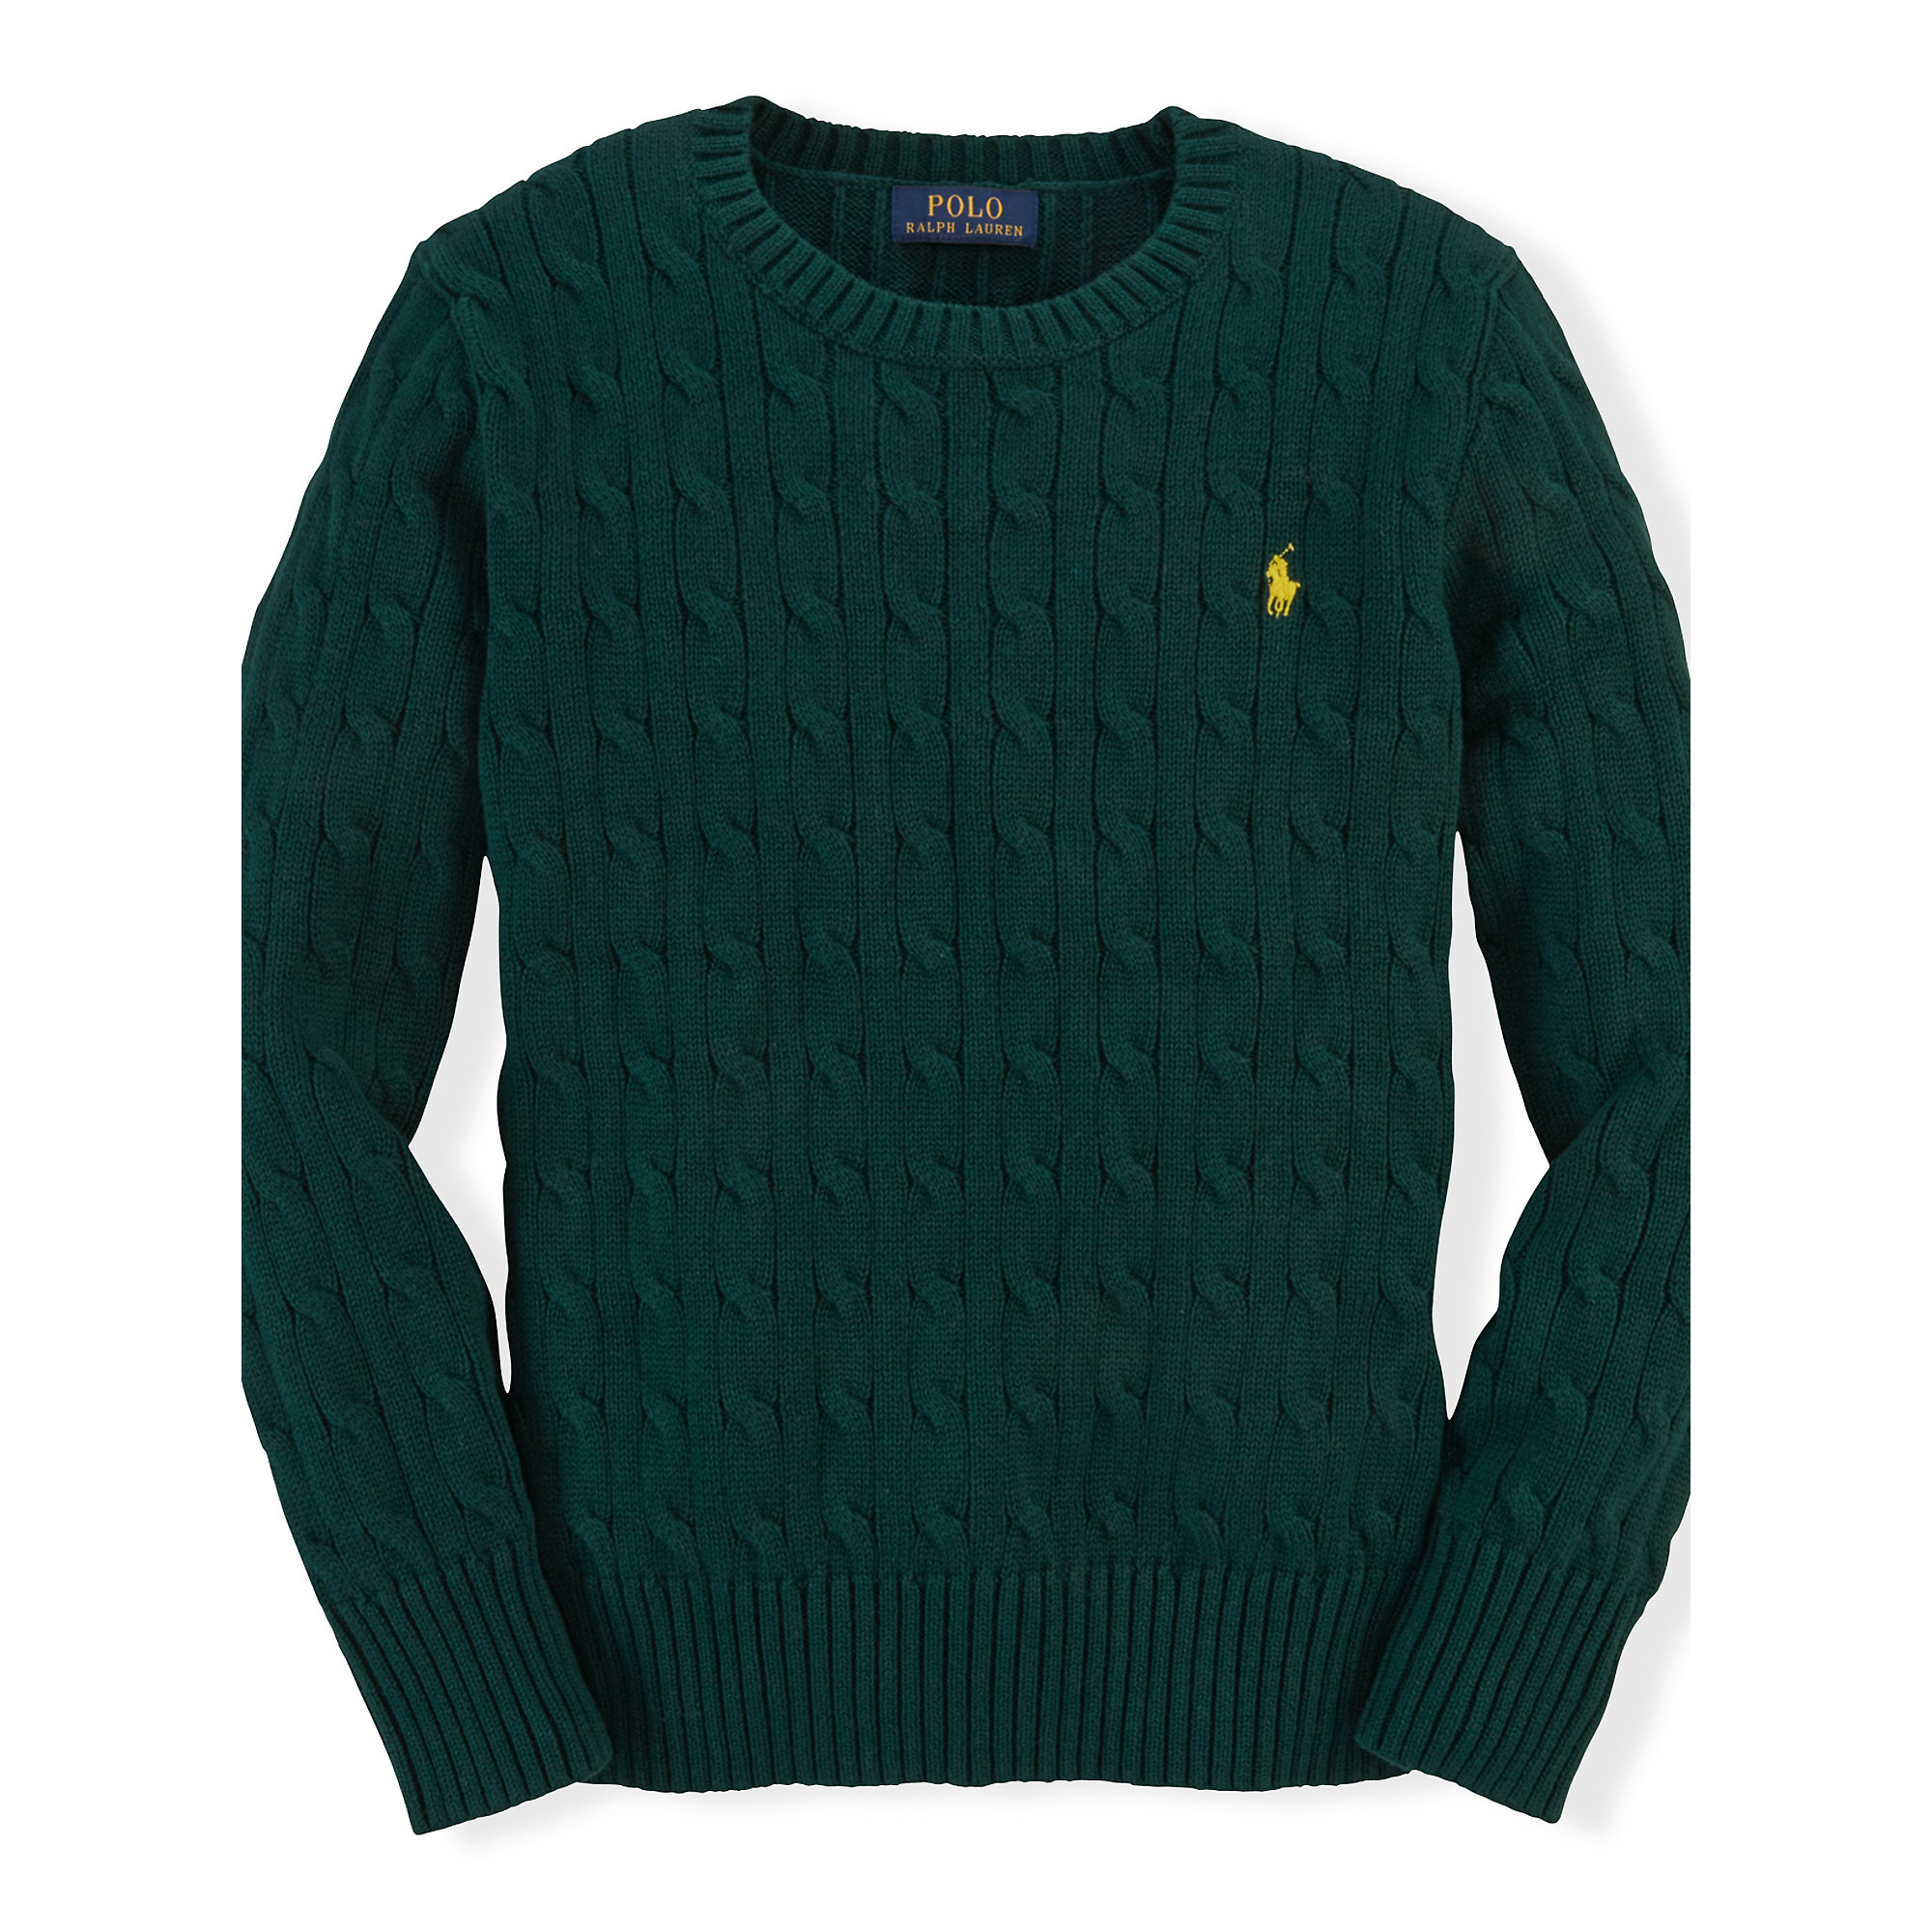 Lyst - Ralph lauren Cable-knit Cotton Sweater in Green for Men